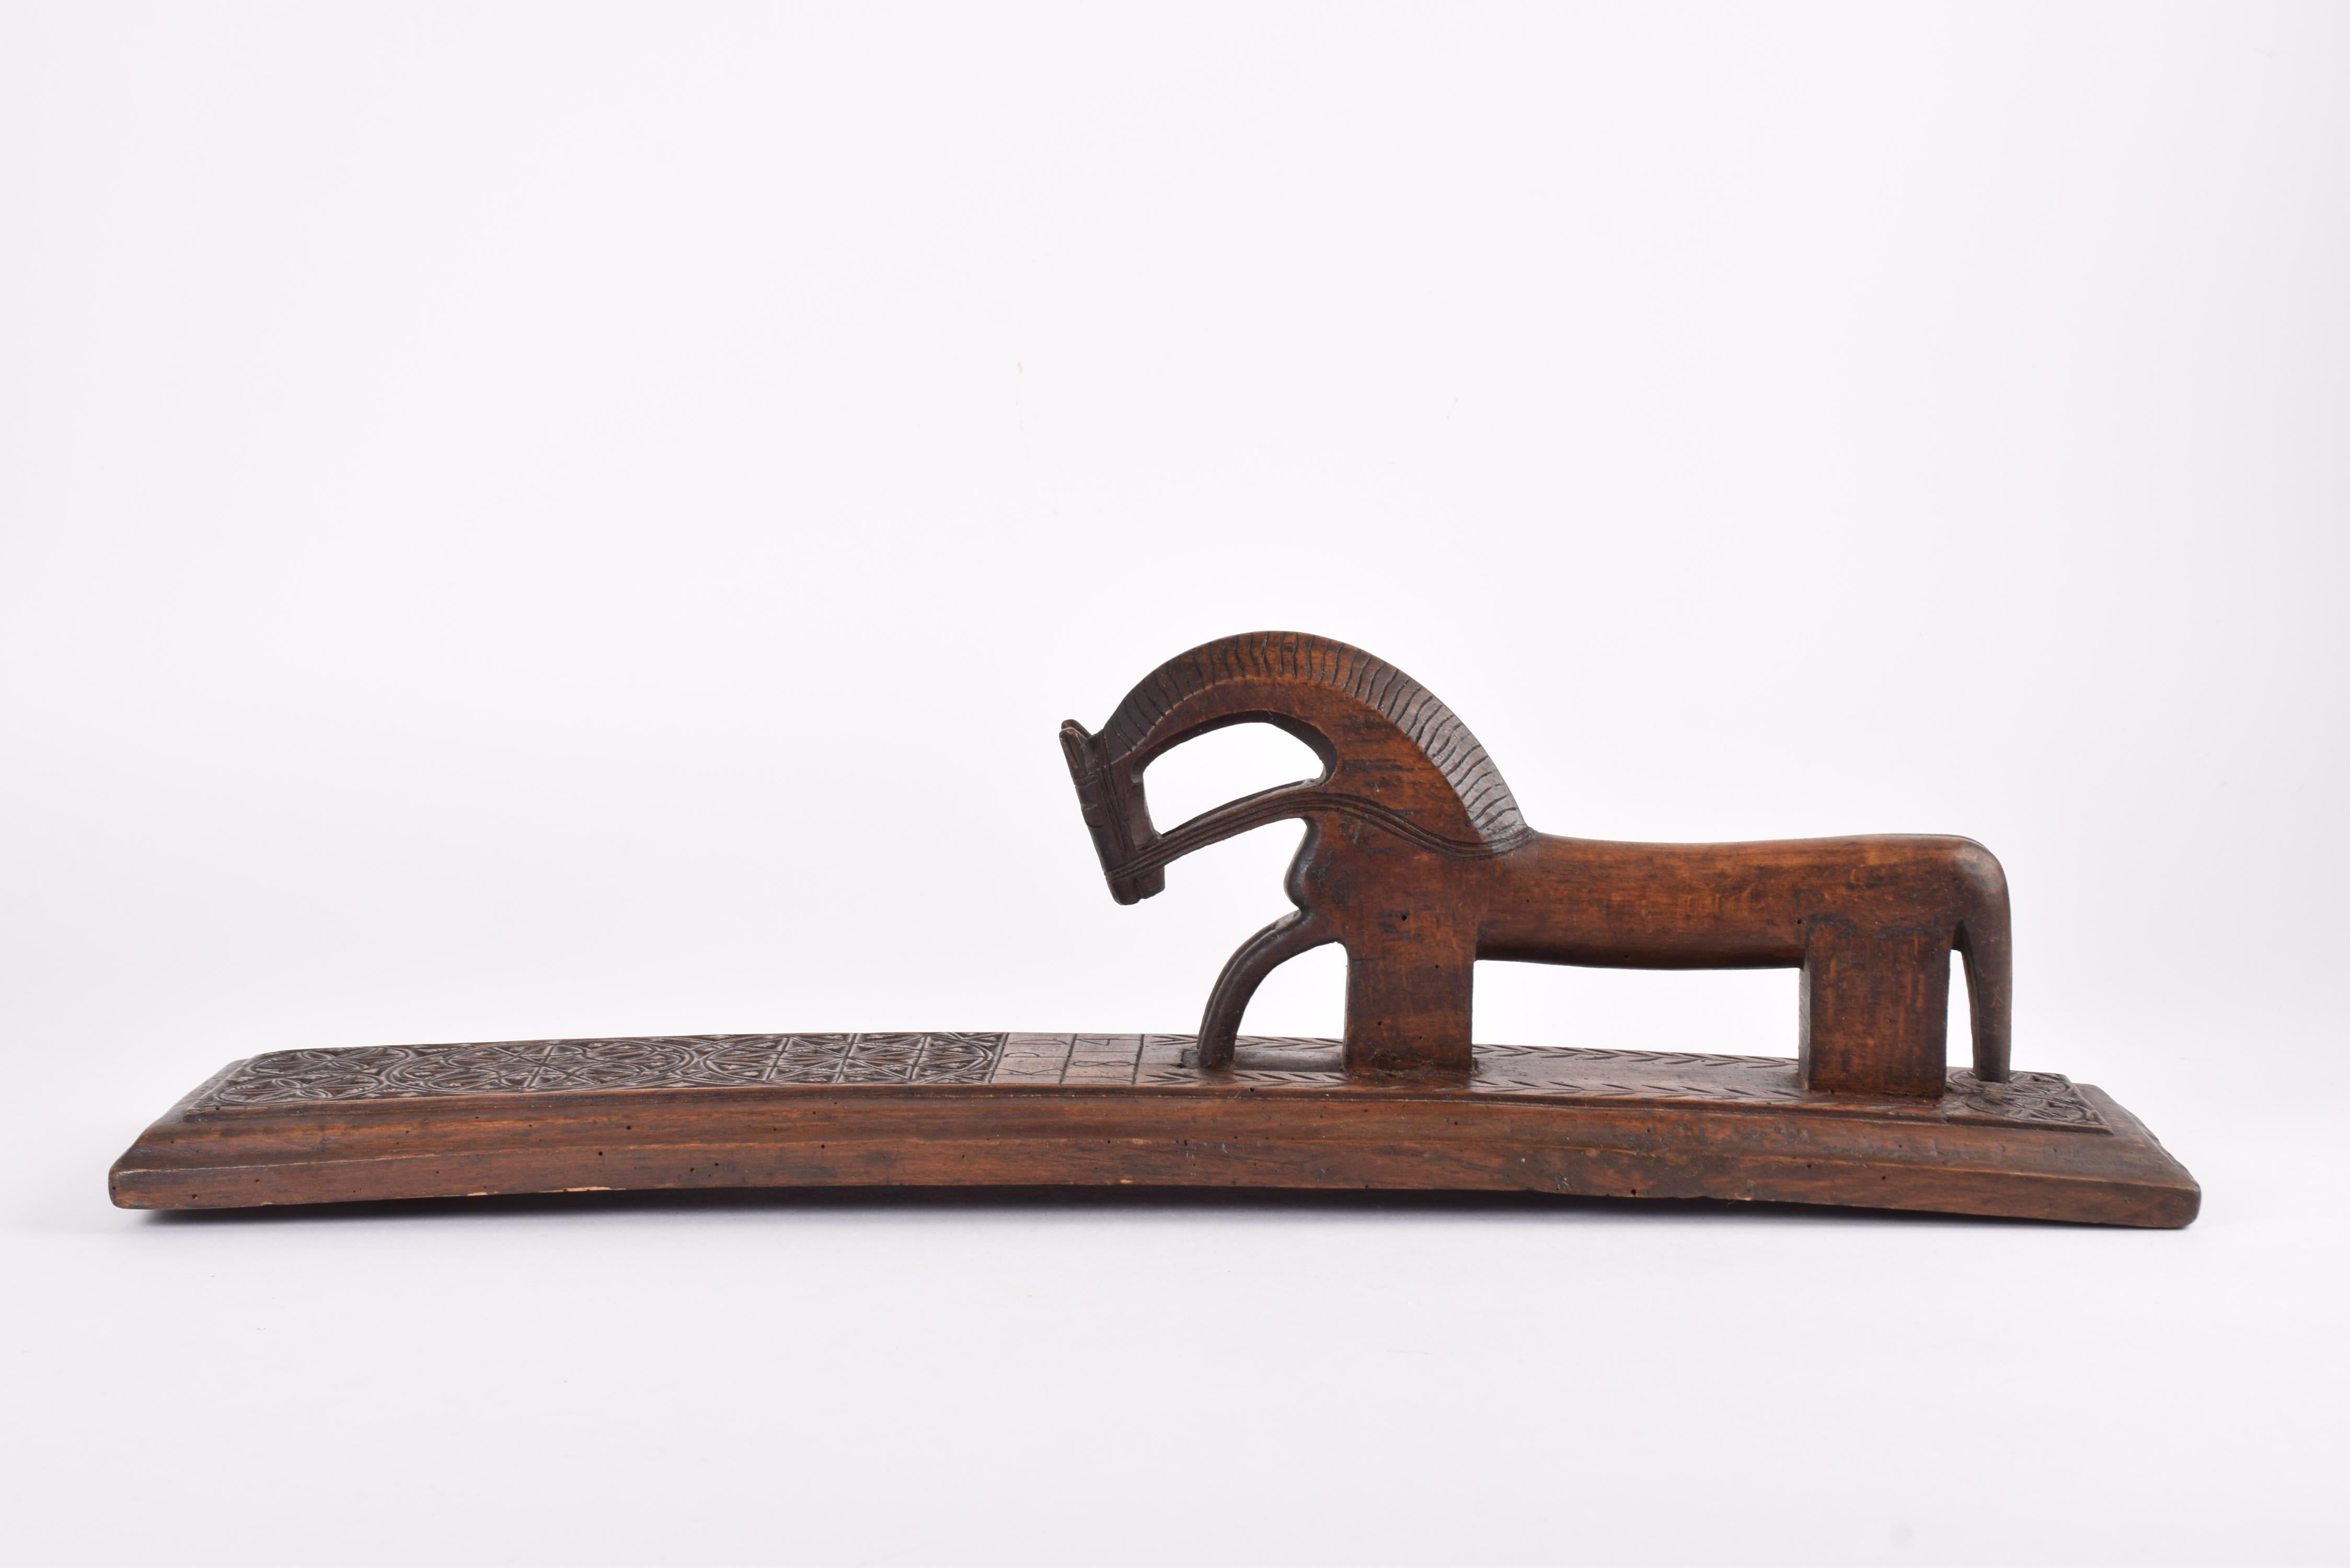 Antique Danish Wooden Mangle Board Wedding Love Gift with Horse Dated 1814 For Sale 11